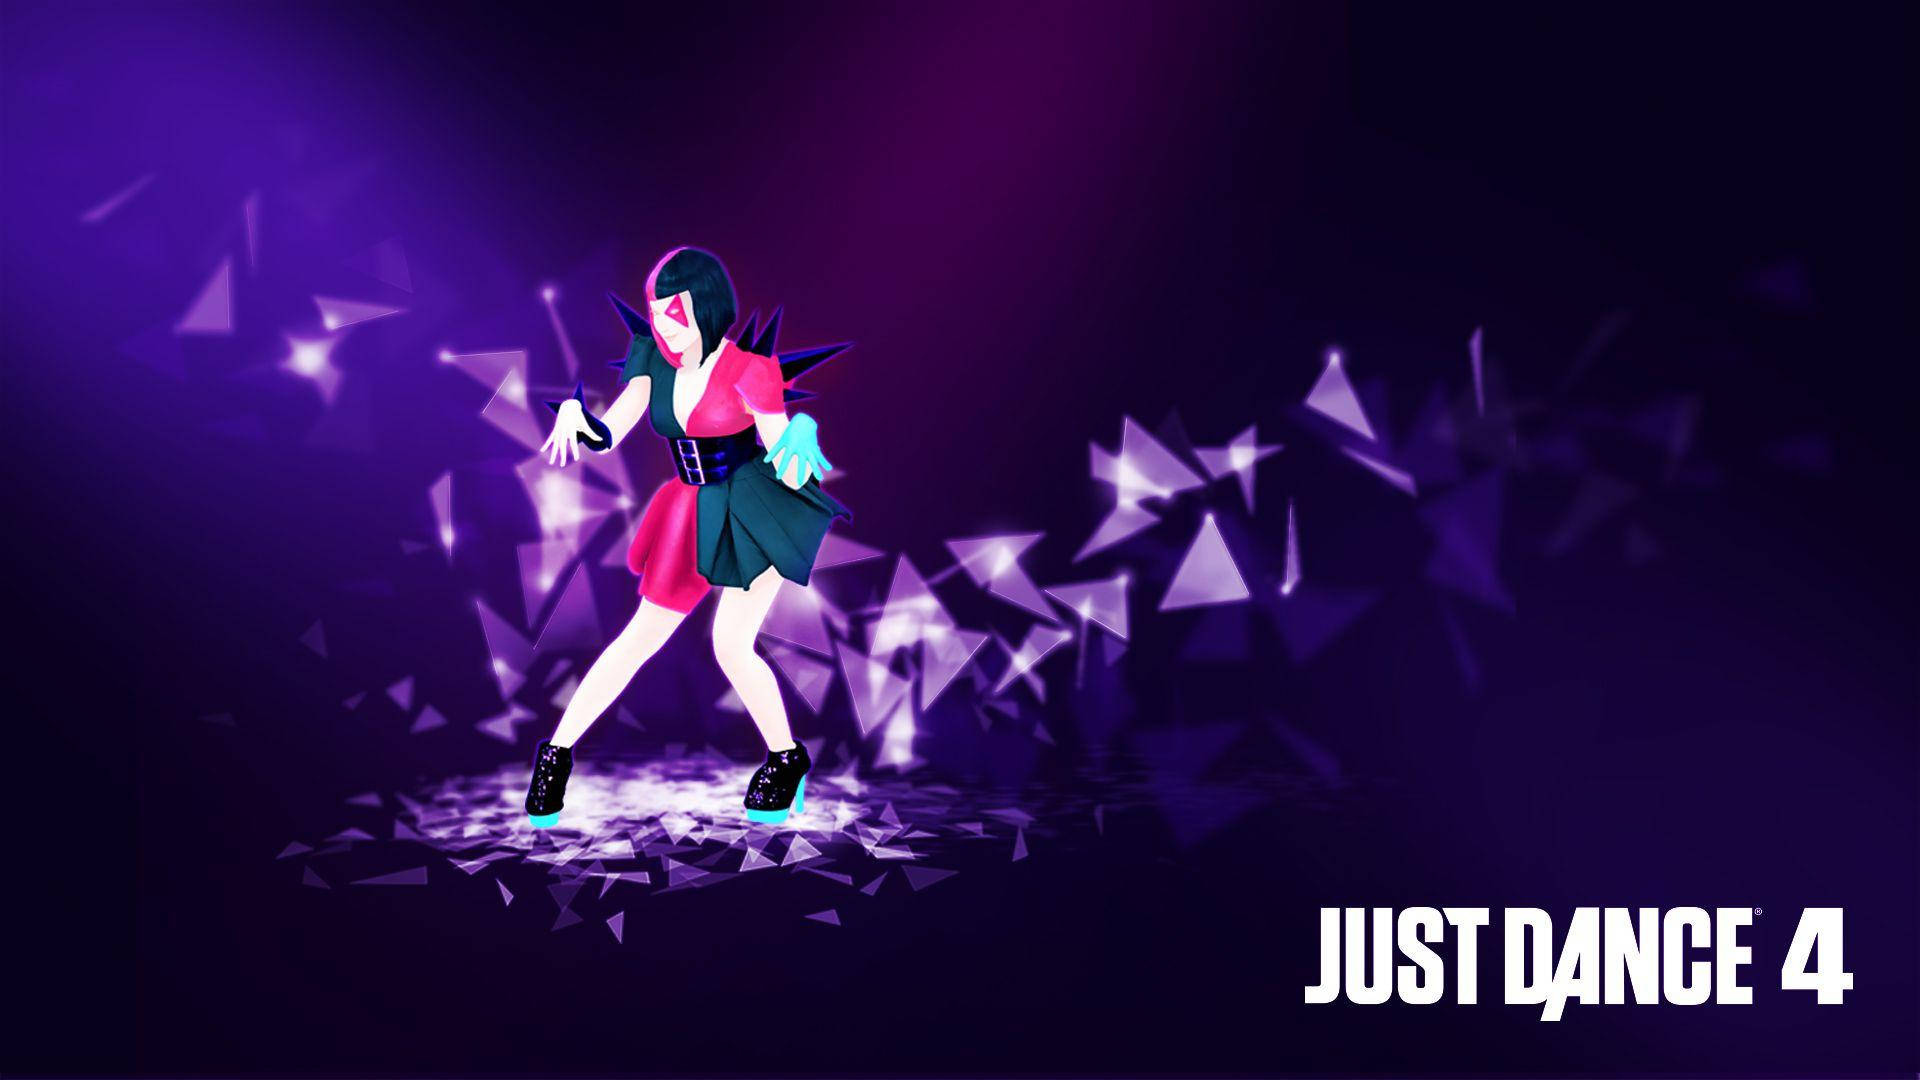 Just Dance 4 Dancer With Floating Triangles Wallpaper